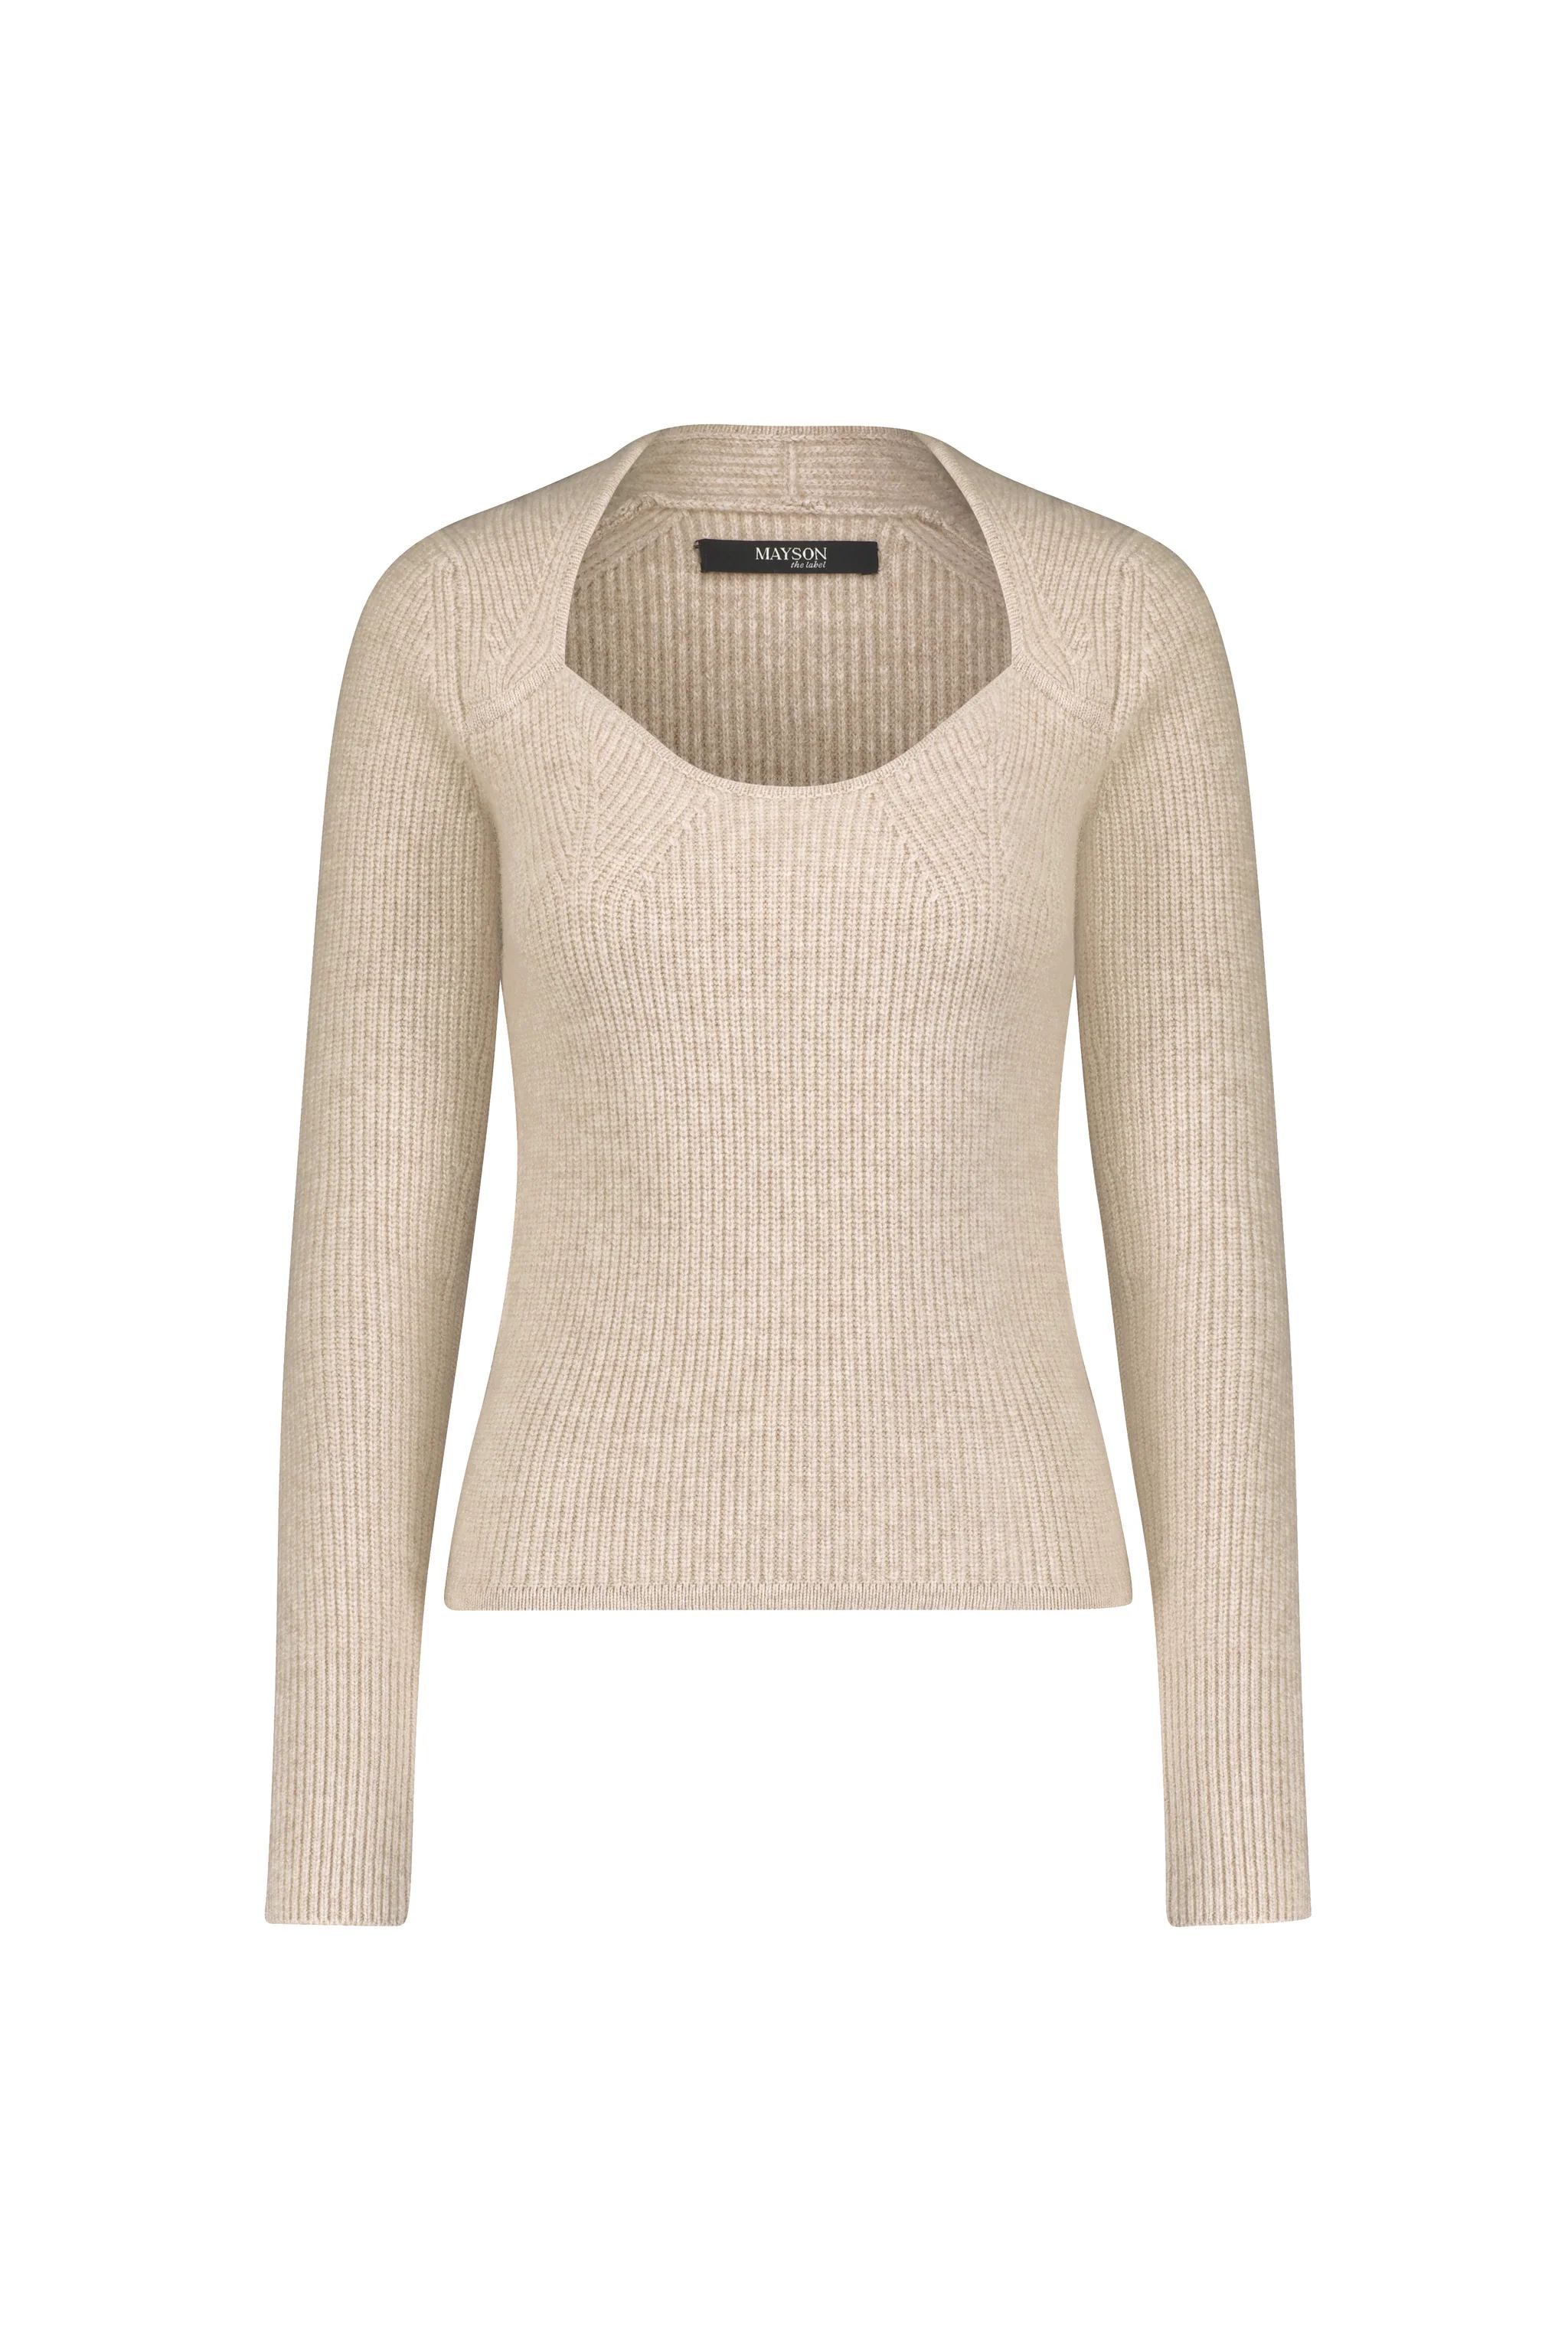 Wool Cashmere Sweetheart Sweater | MAYSON the label